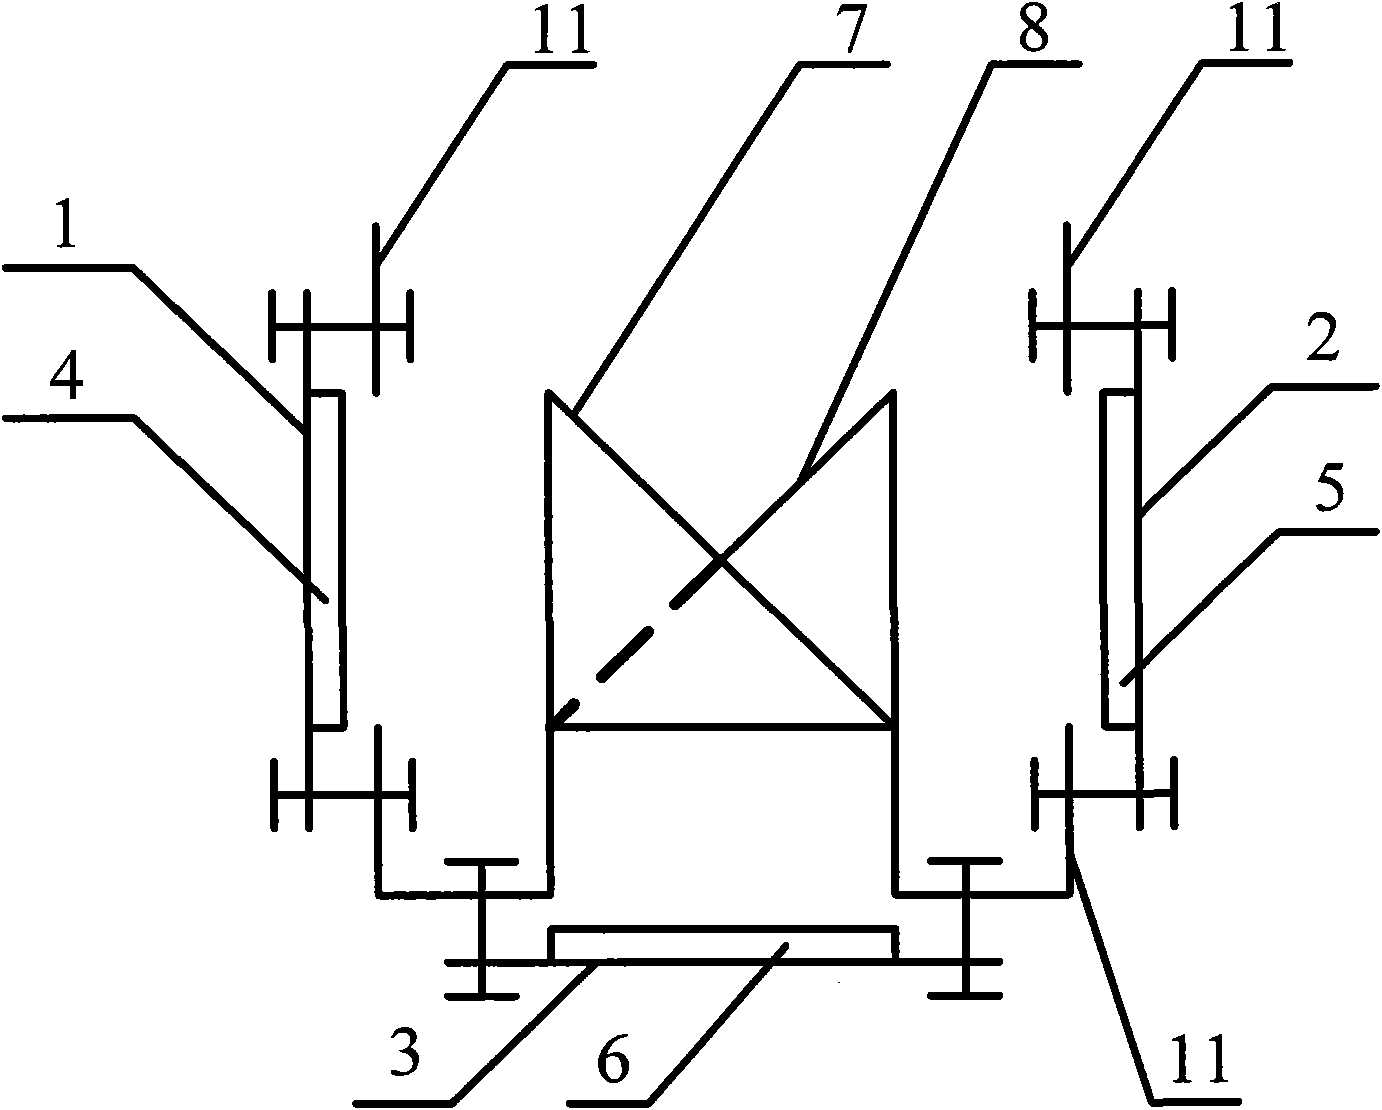 Focal plane assembly capable of realizing same viewing field splicing